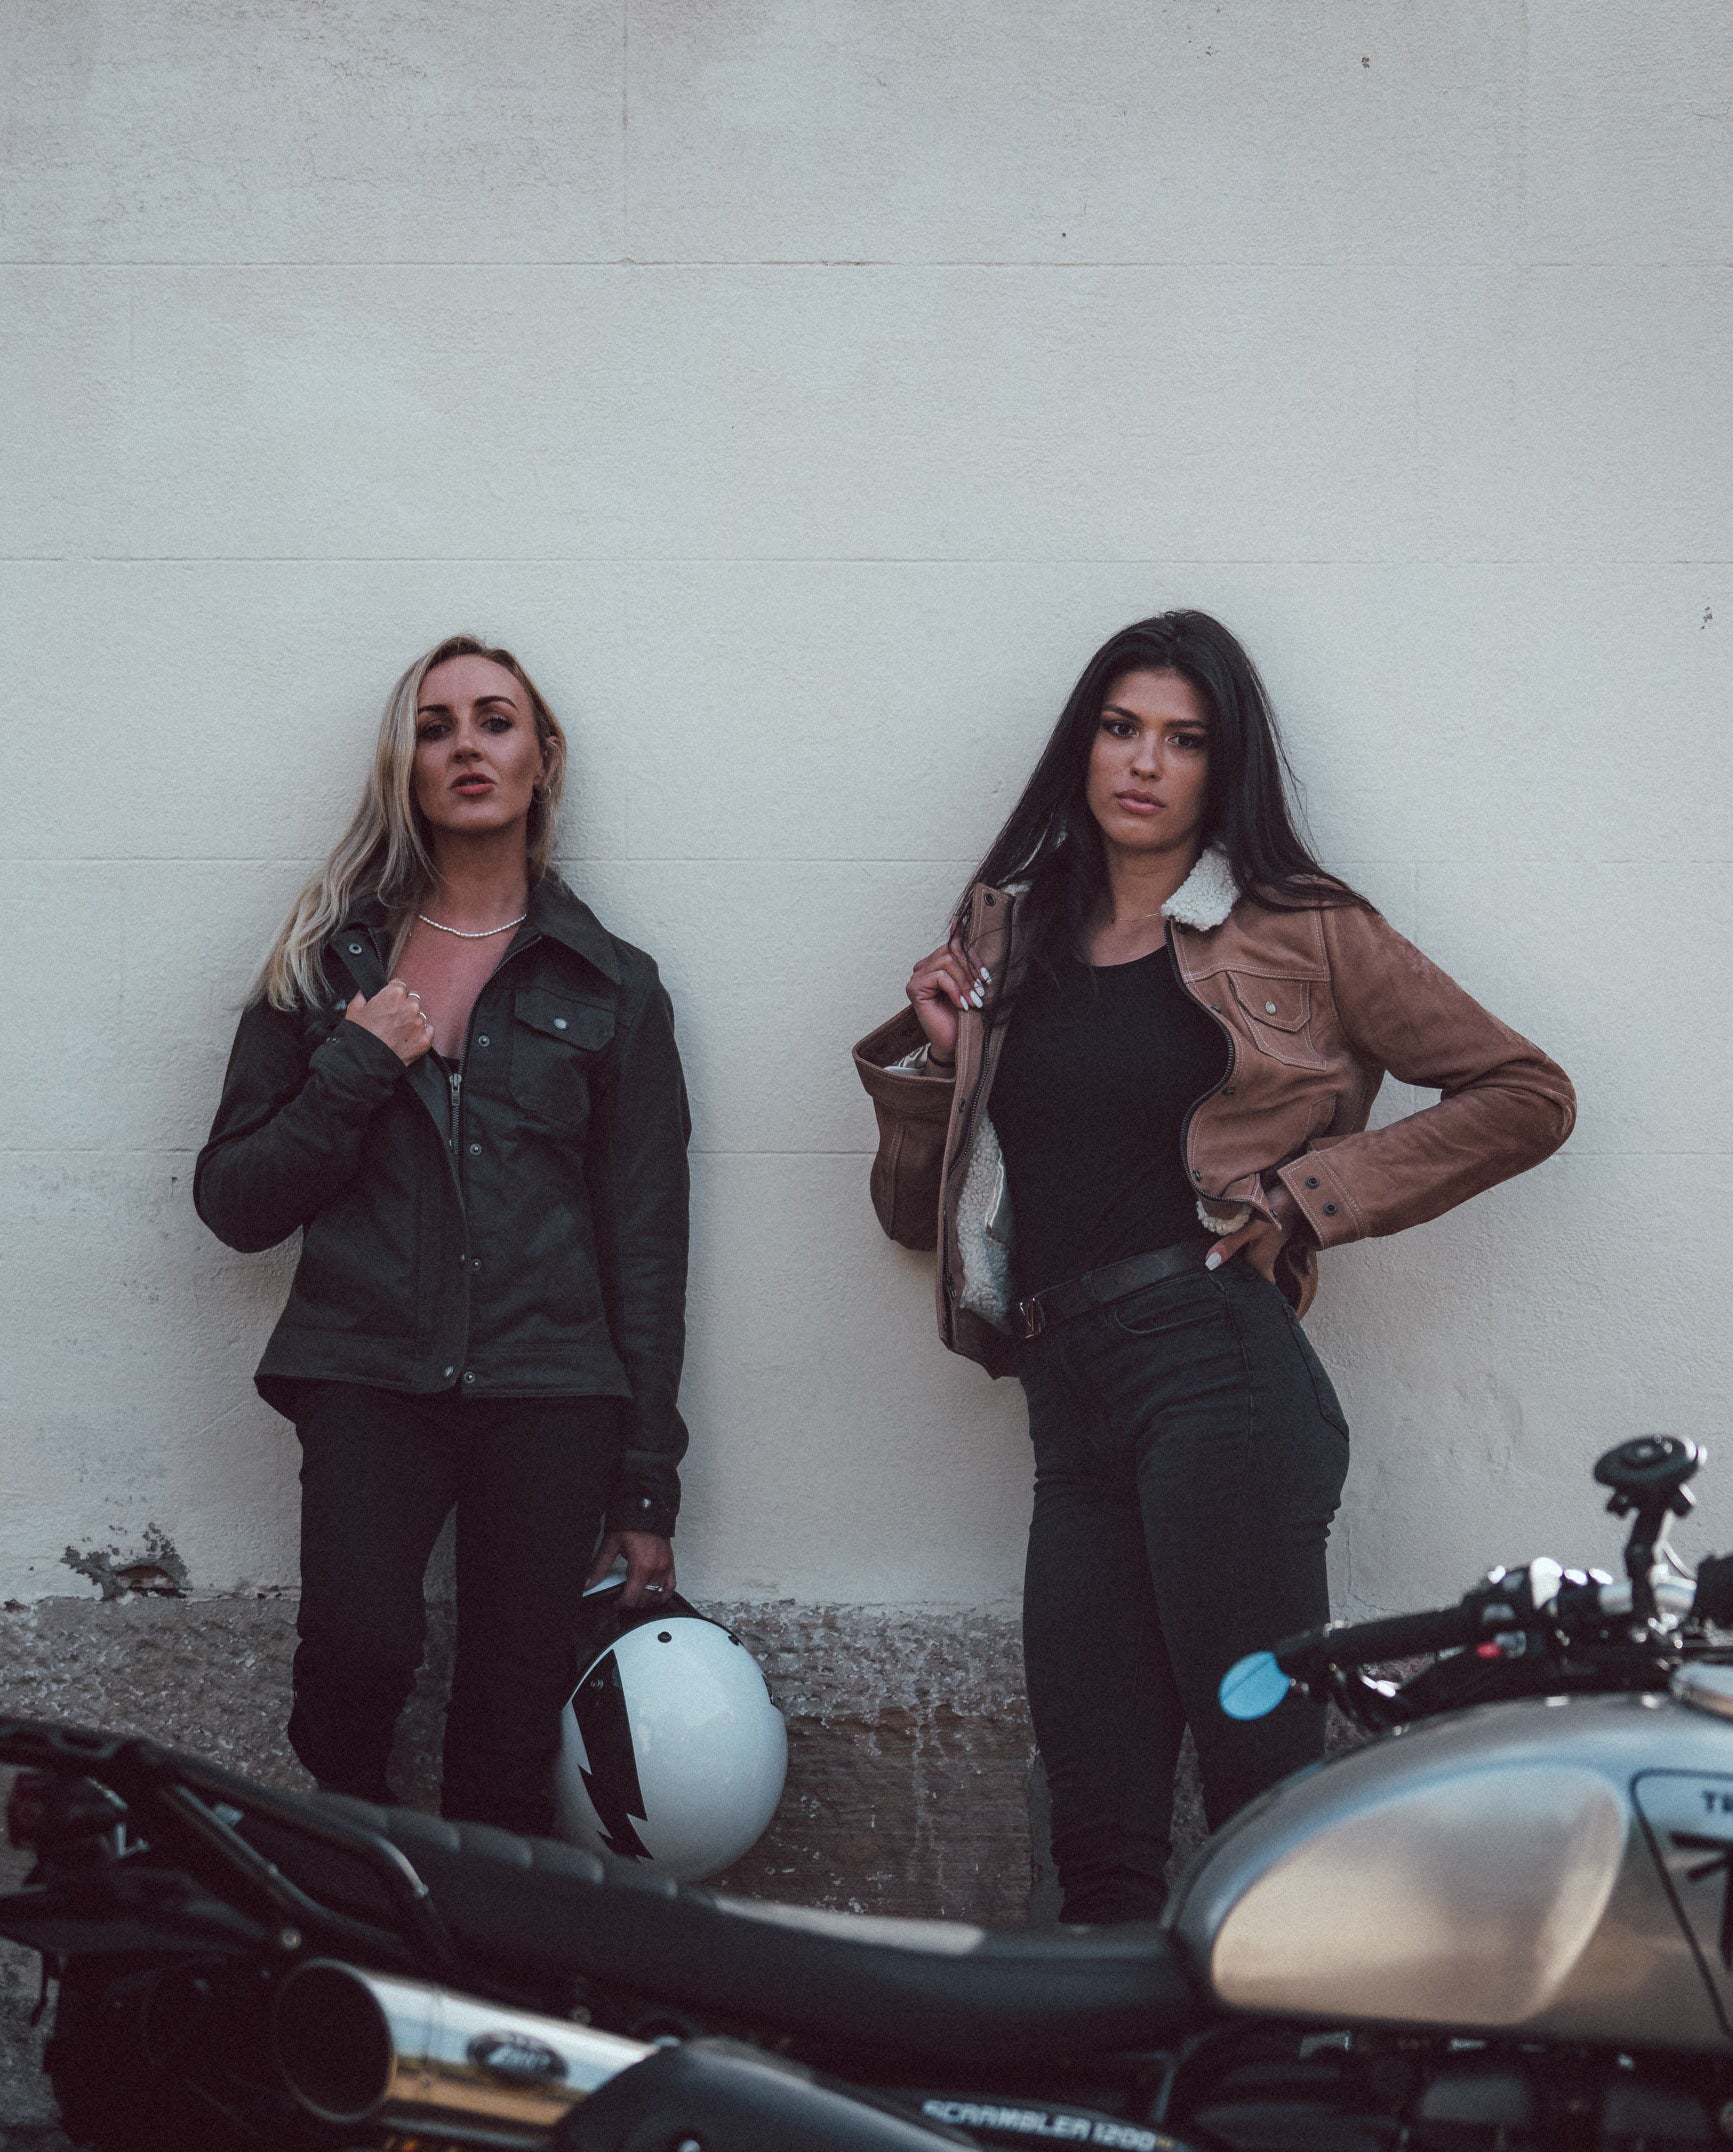 Leather Motorcycle Jackets vs Textile Motorcycle Jackets - What's better for riding?